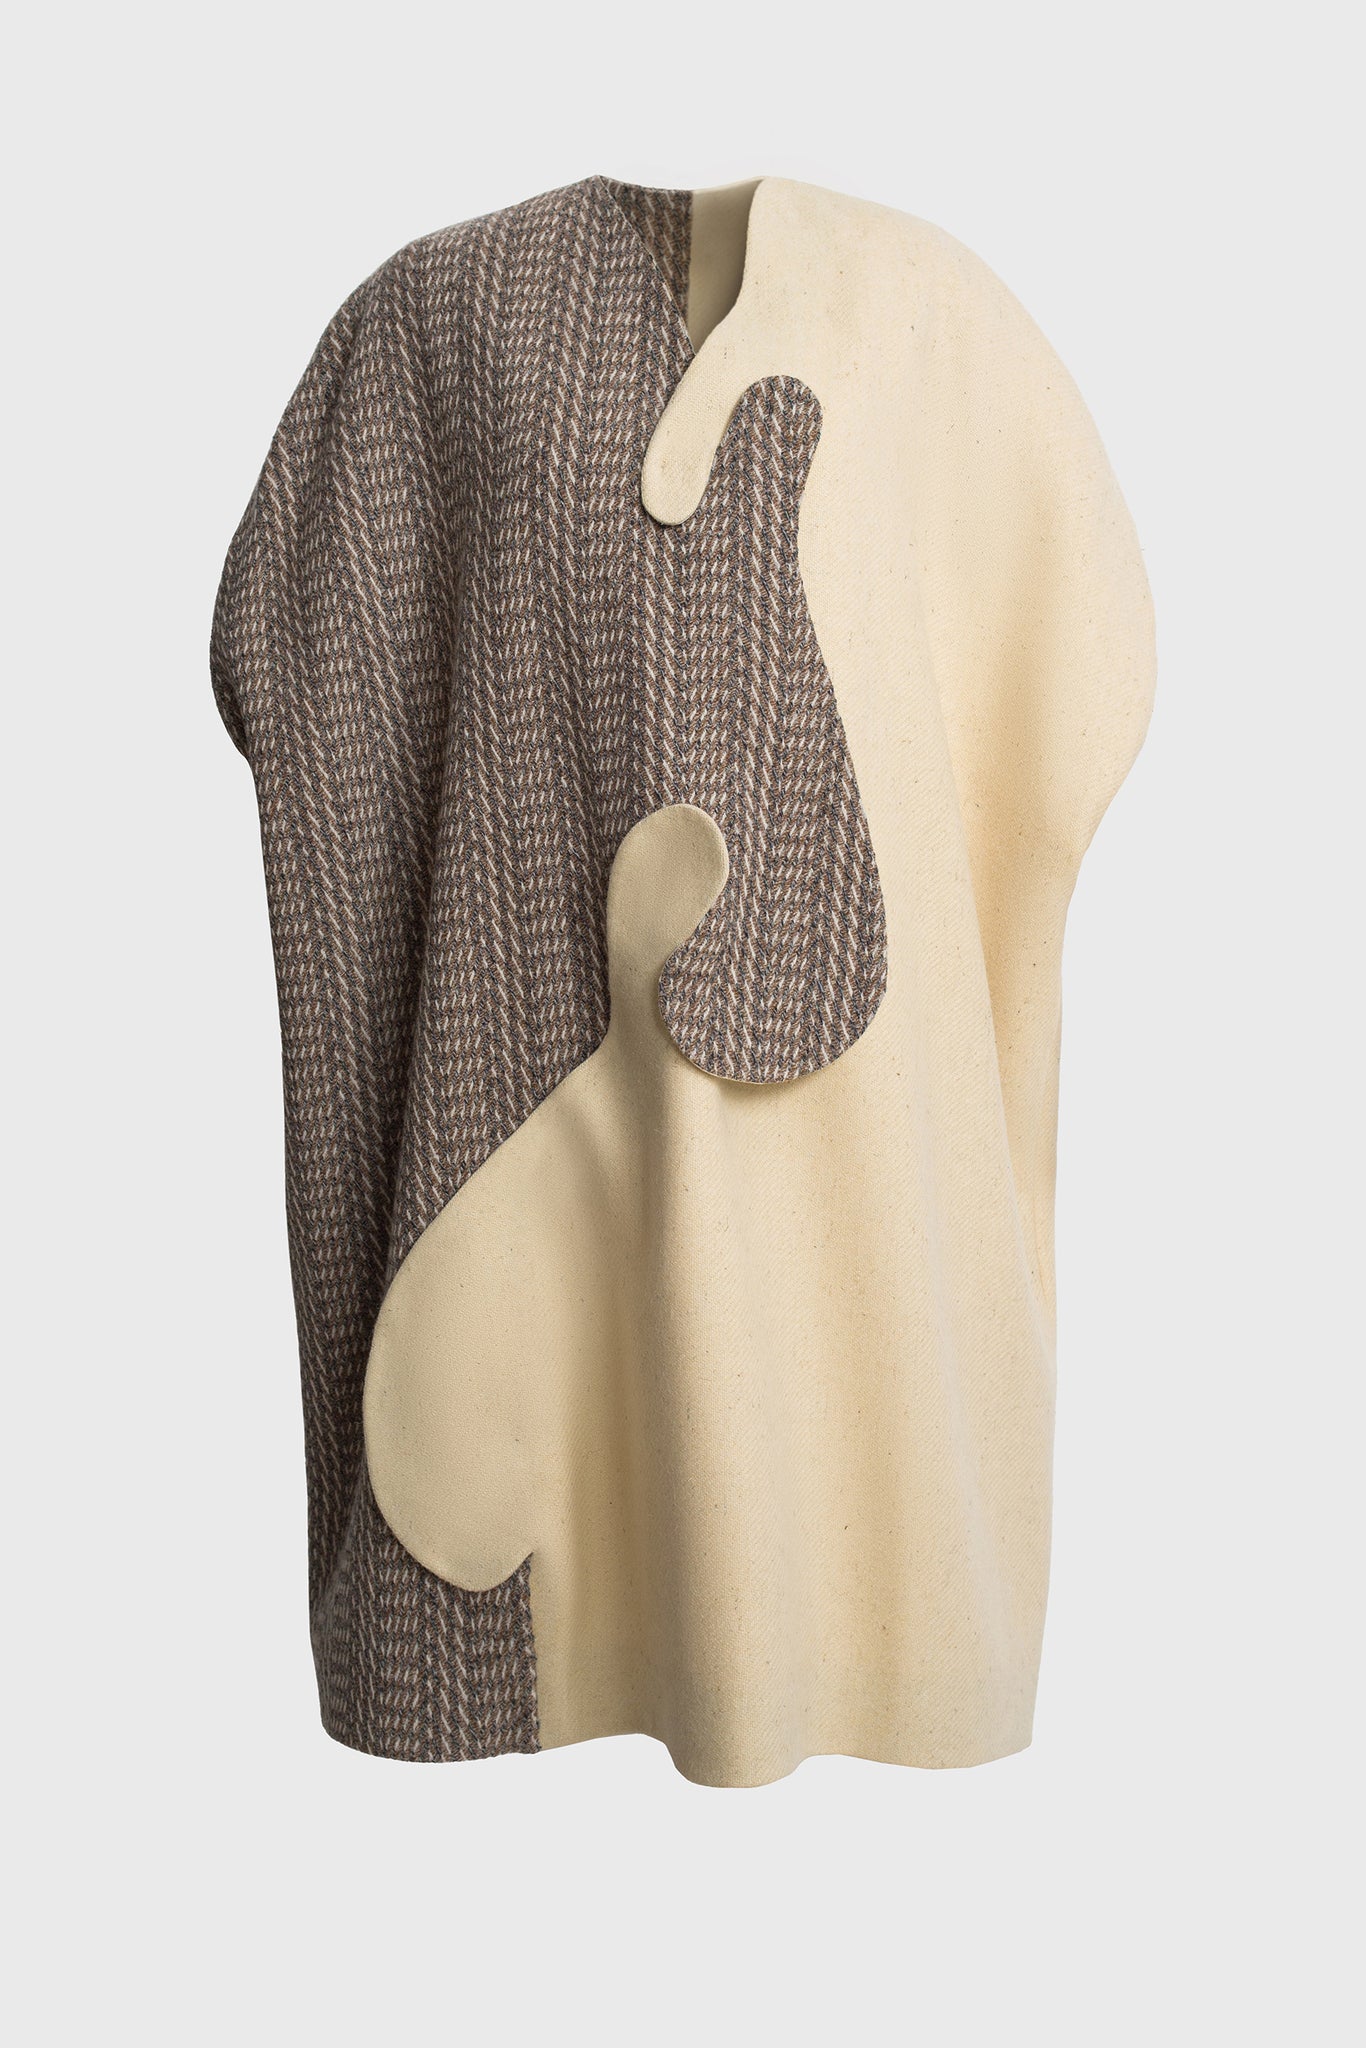 women's cape, front intricate closure, press and studs, organic round shapes, sleeveless, herringbone wool, undyed, natural, asymmetrical design, earth tones, easy to style